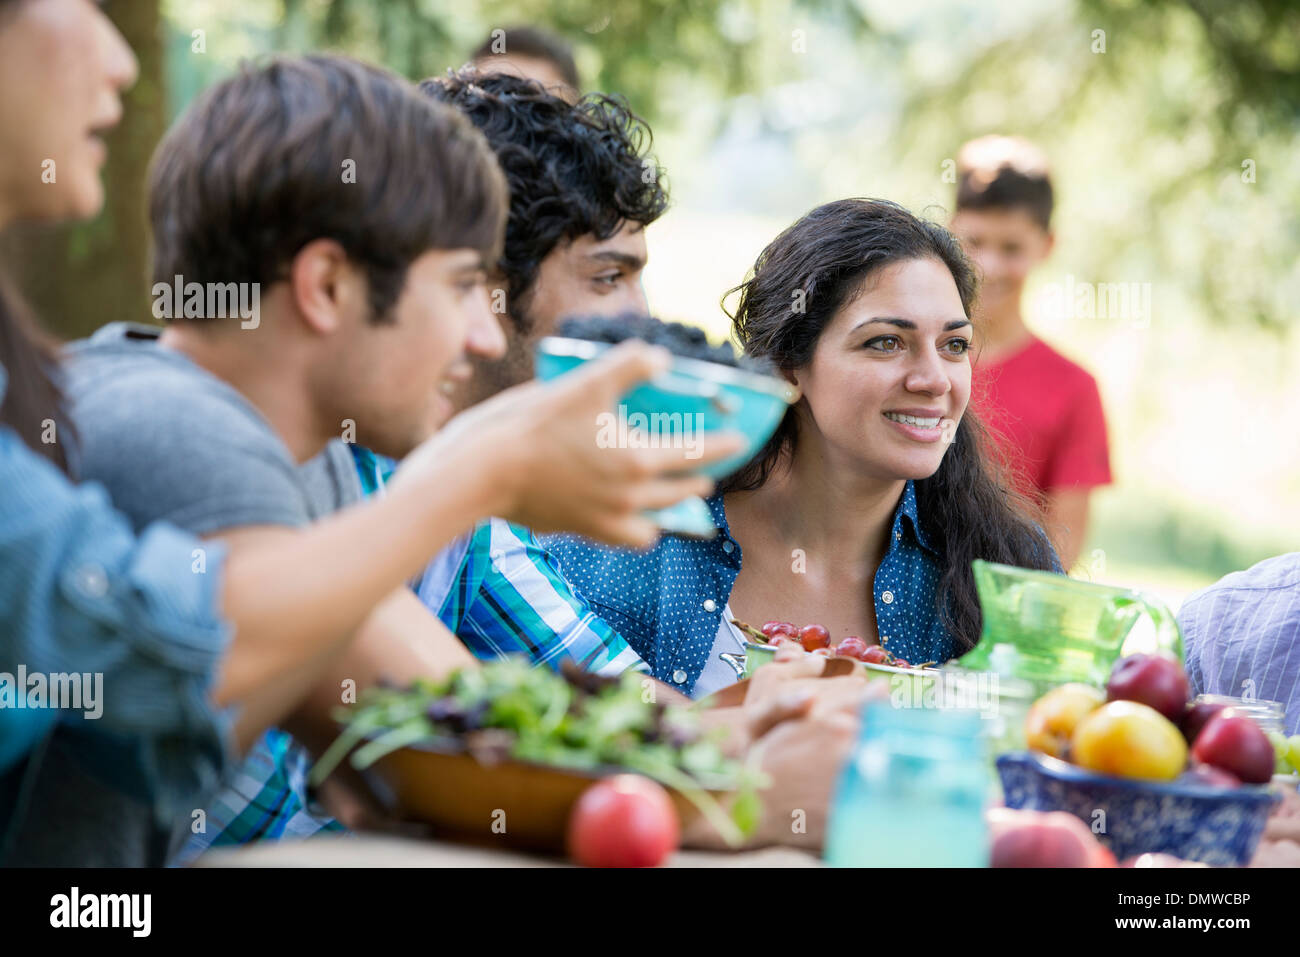 Adults and children around a table at a party in a garden. Stock Photo